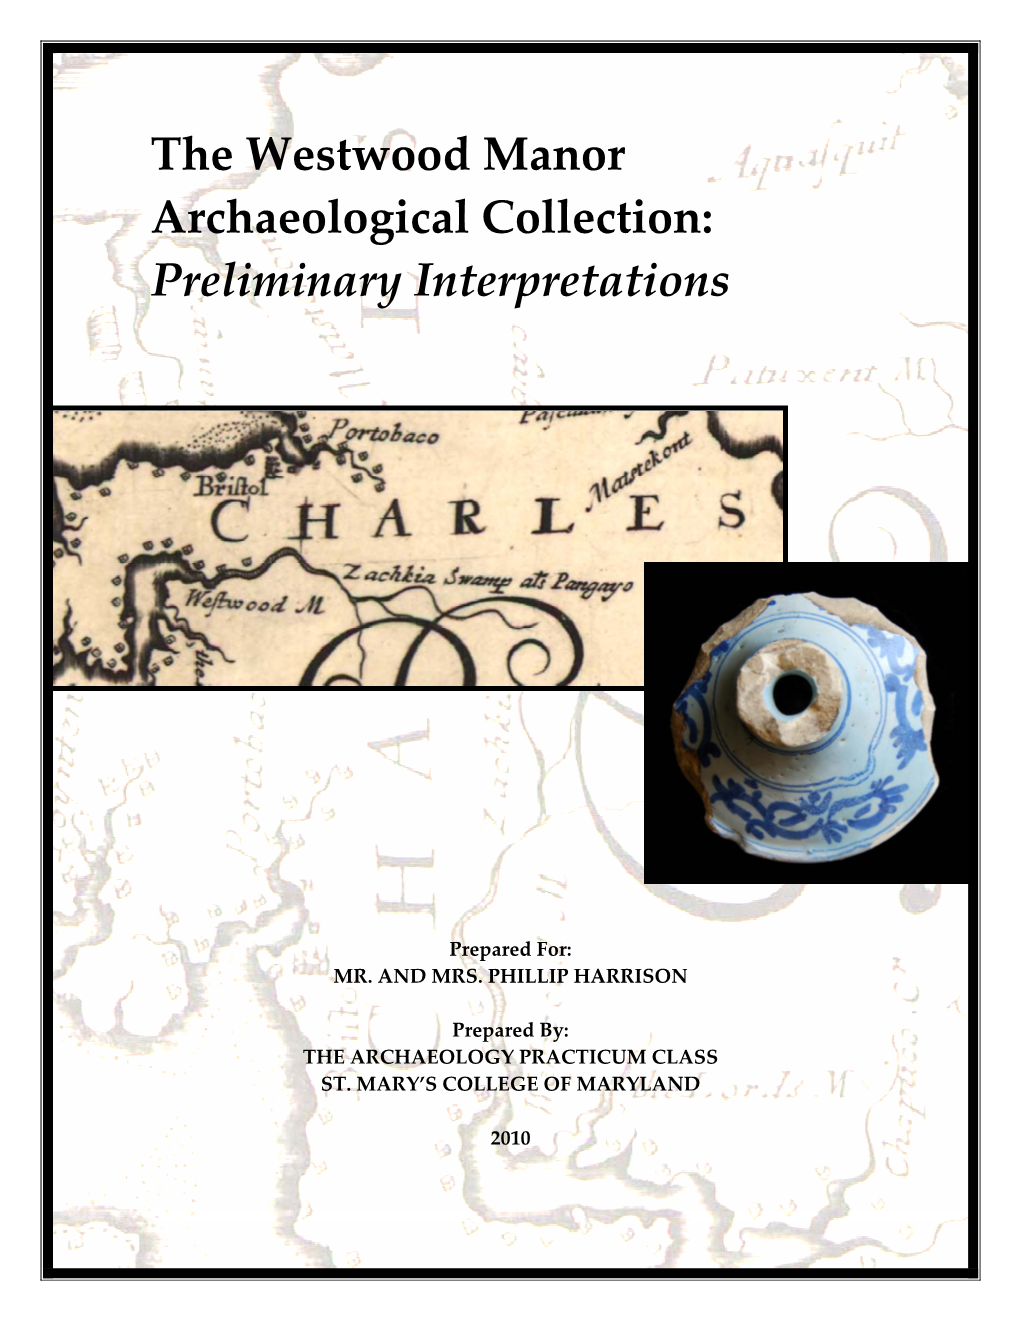 The Westwood Manor Archaeological Collection: Preliminary Interpretations